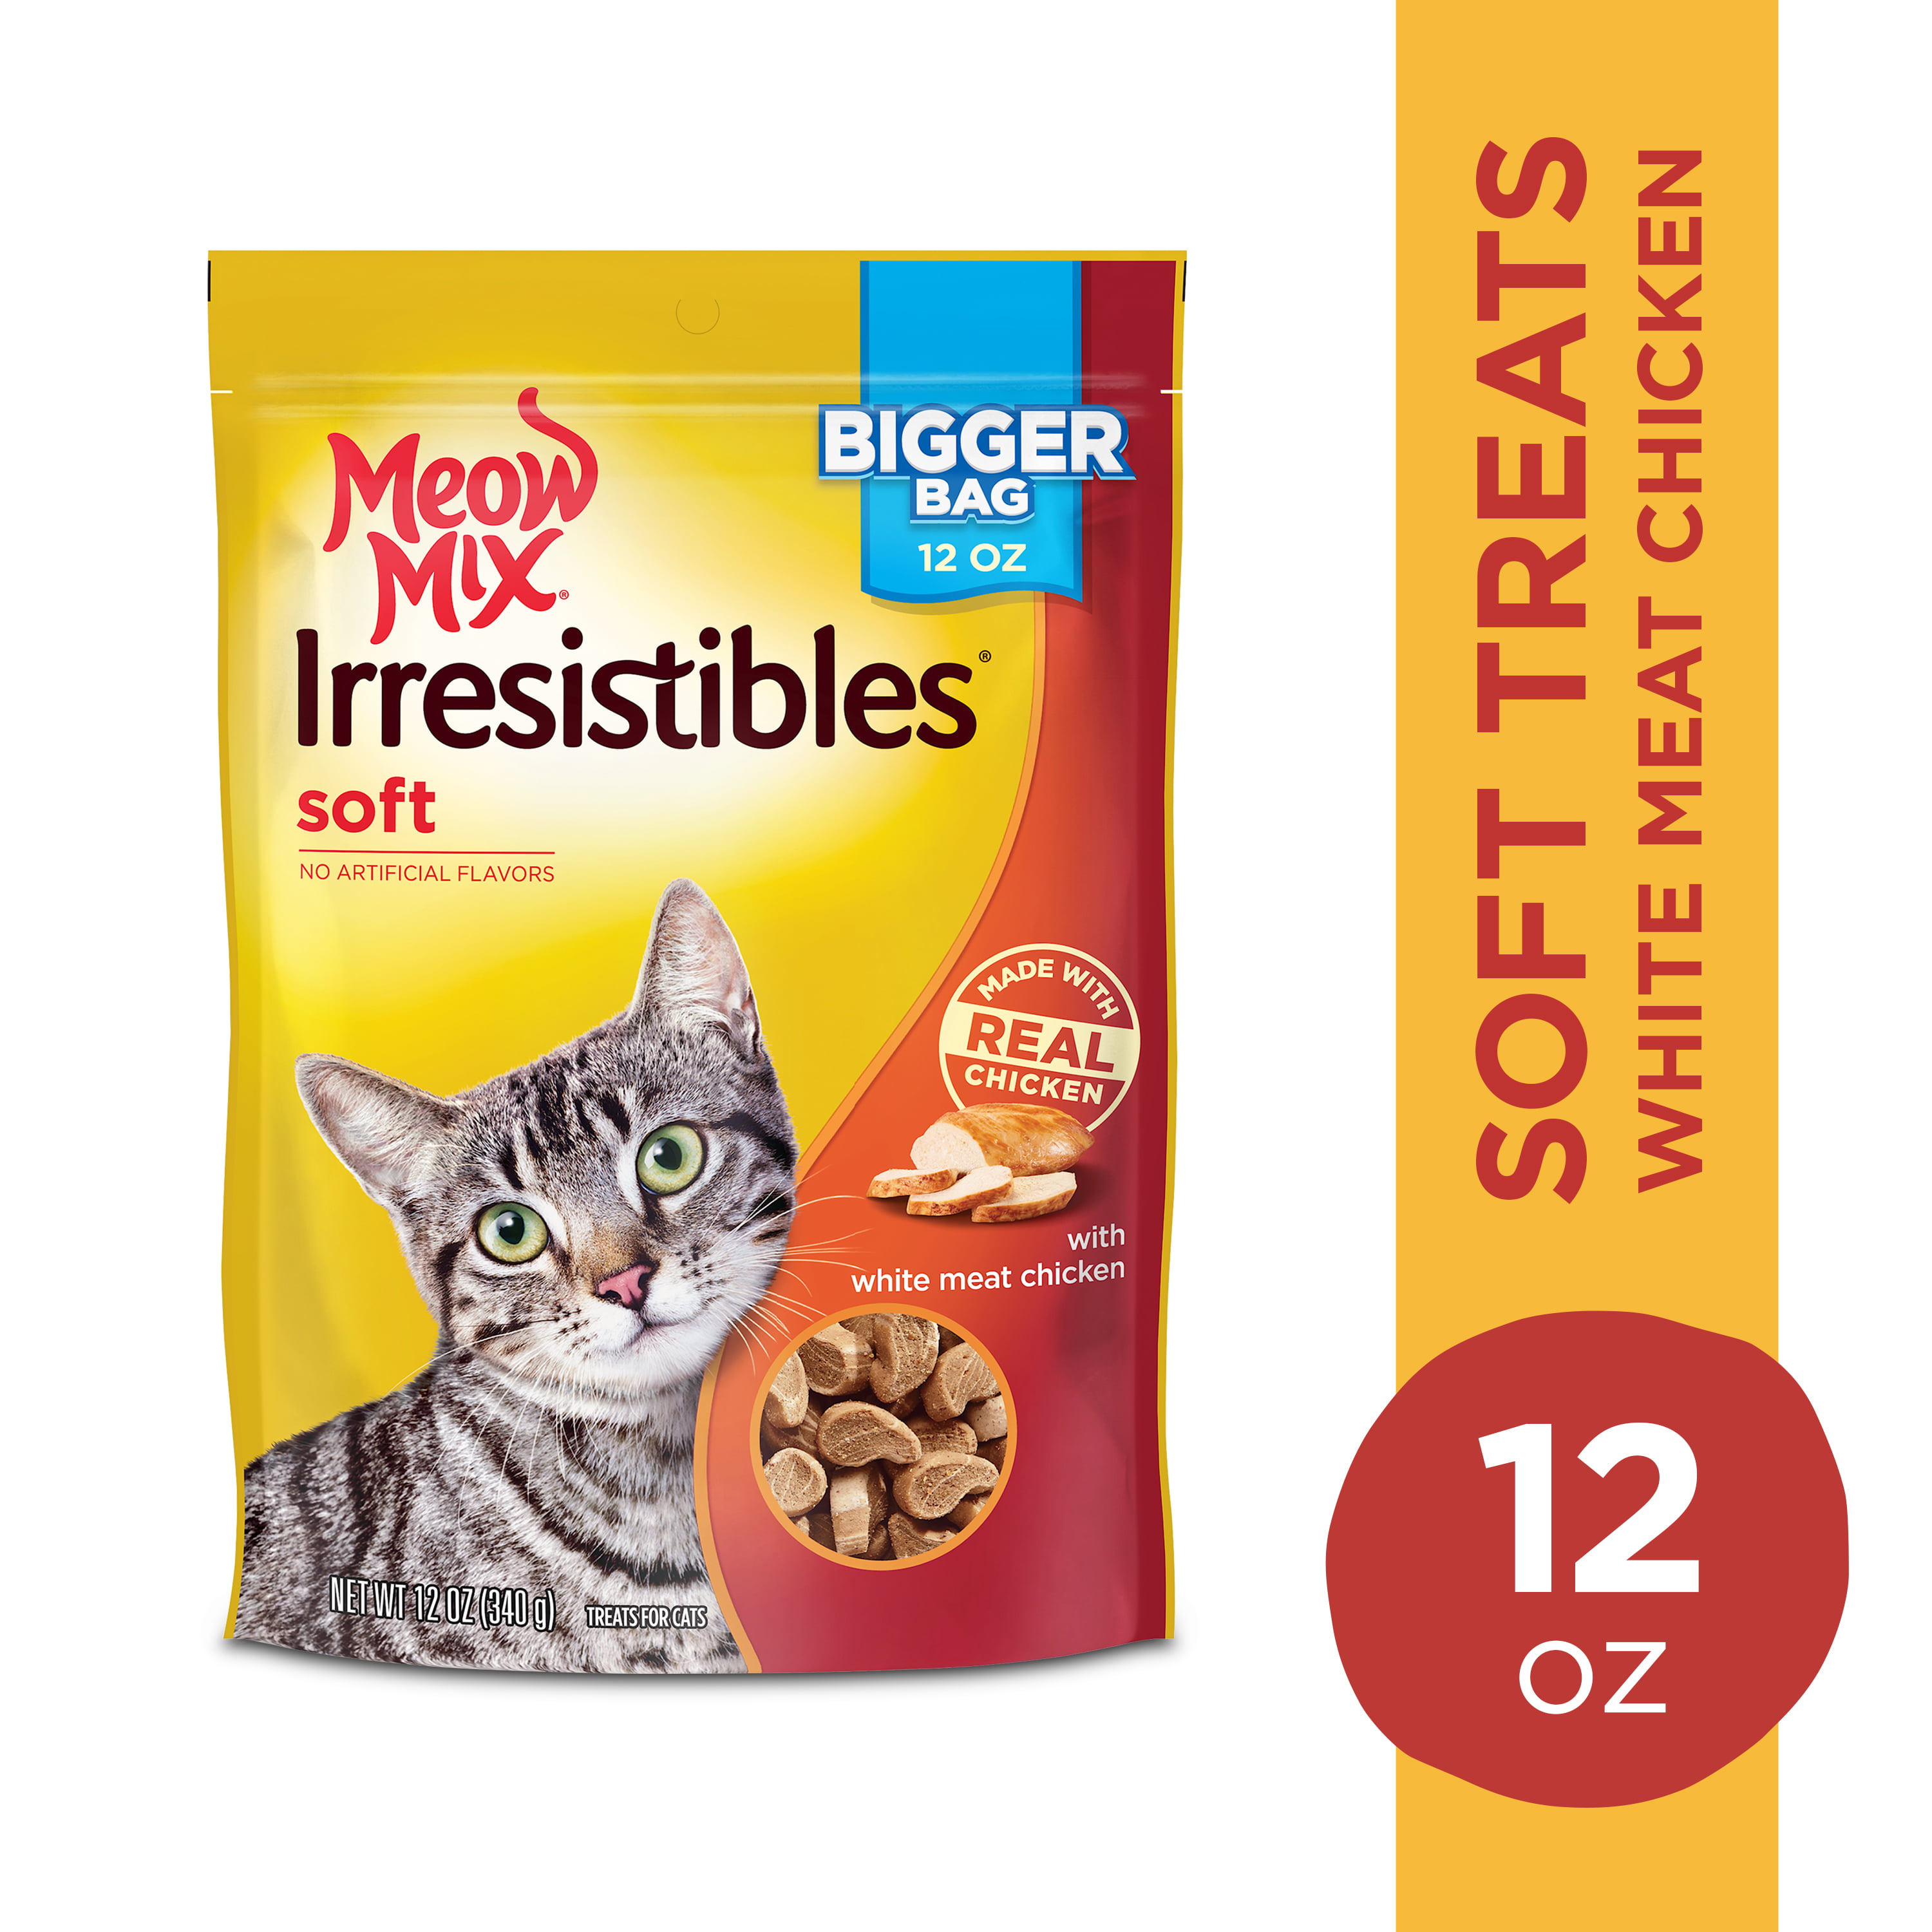 Meow Mix Irresistibles Cat Treats Soft With White Meat Chicken, 12